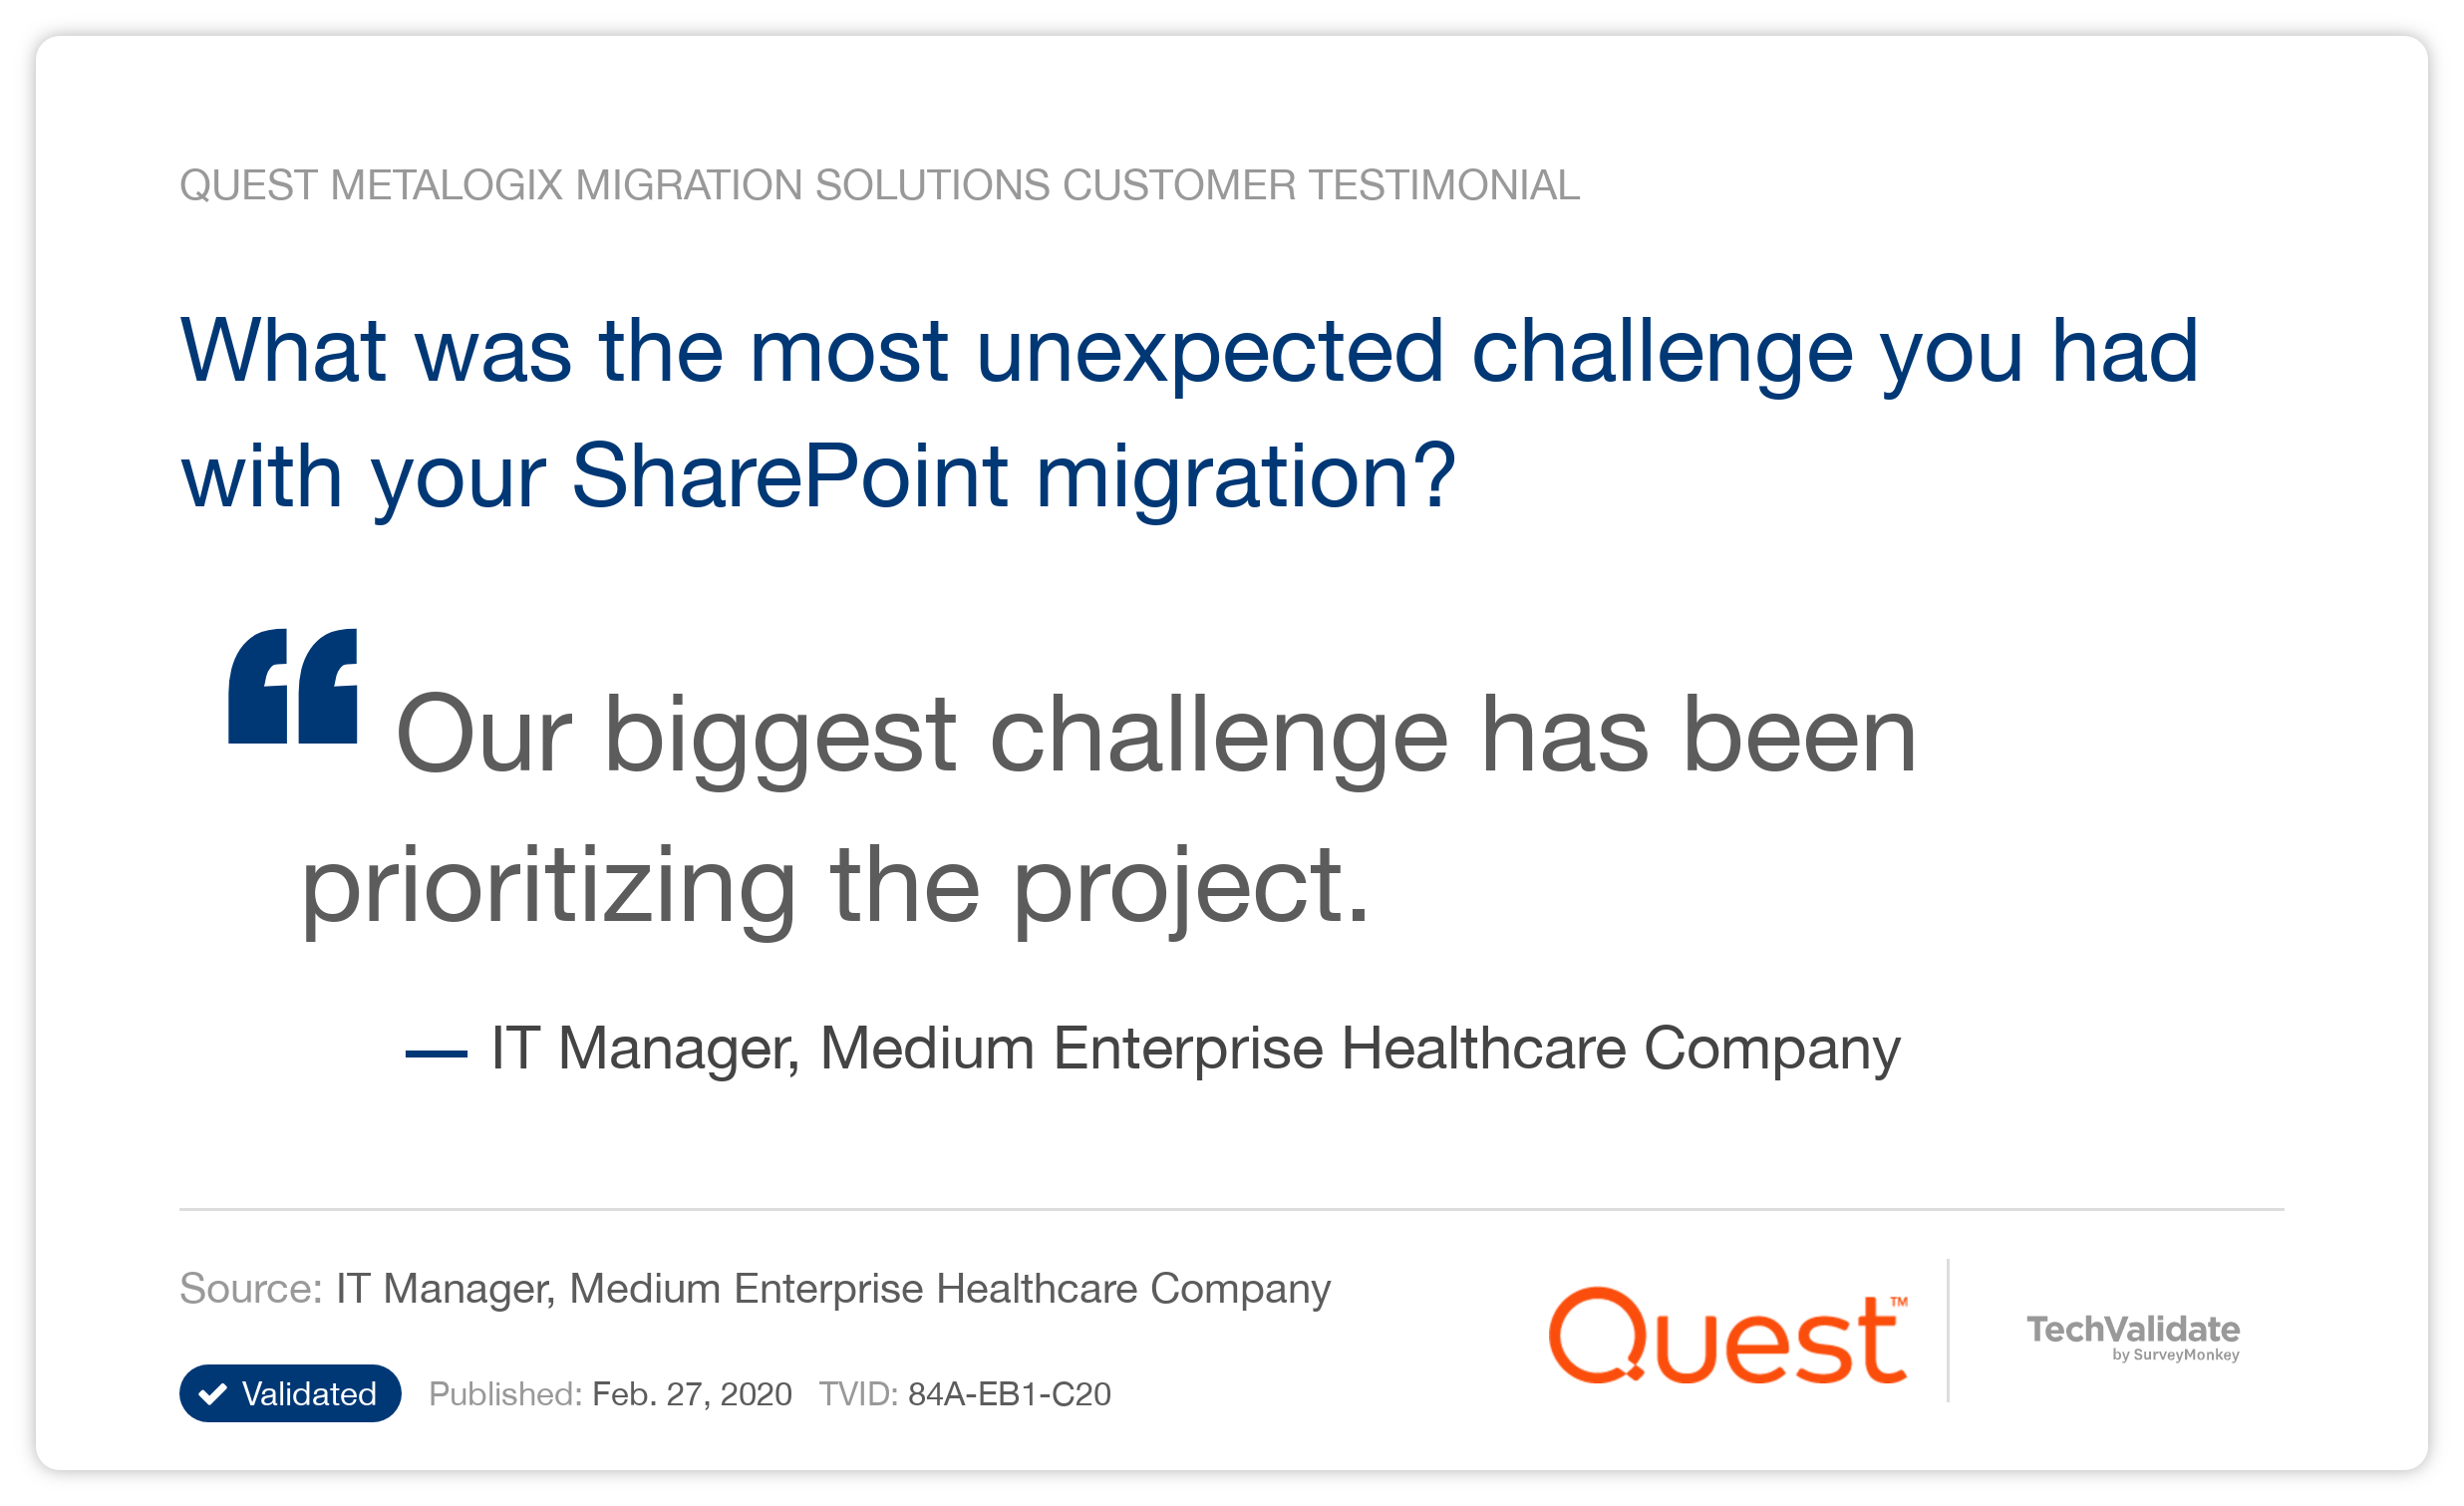 What was the most unexpected challenge you had with your SharePoint migration?